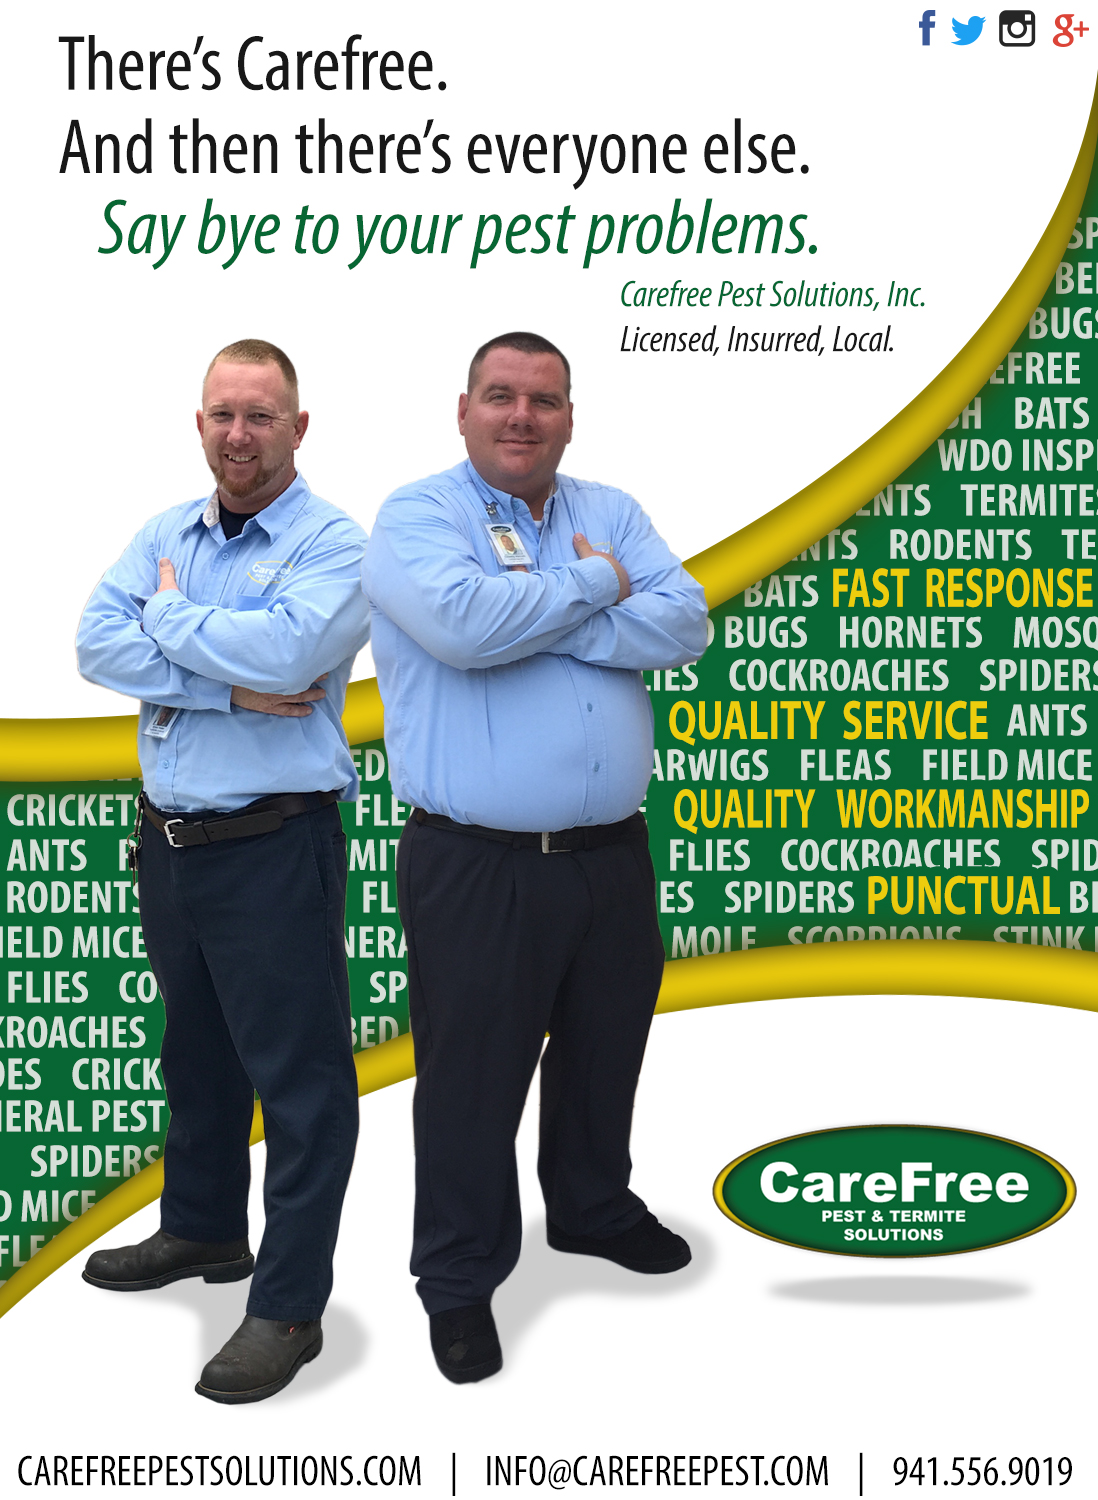 Carefree Pest Solutions Staff